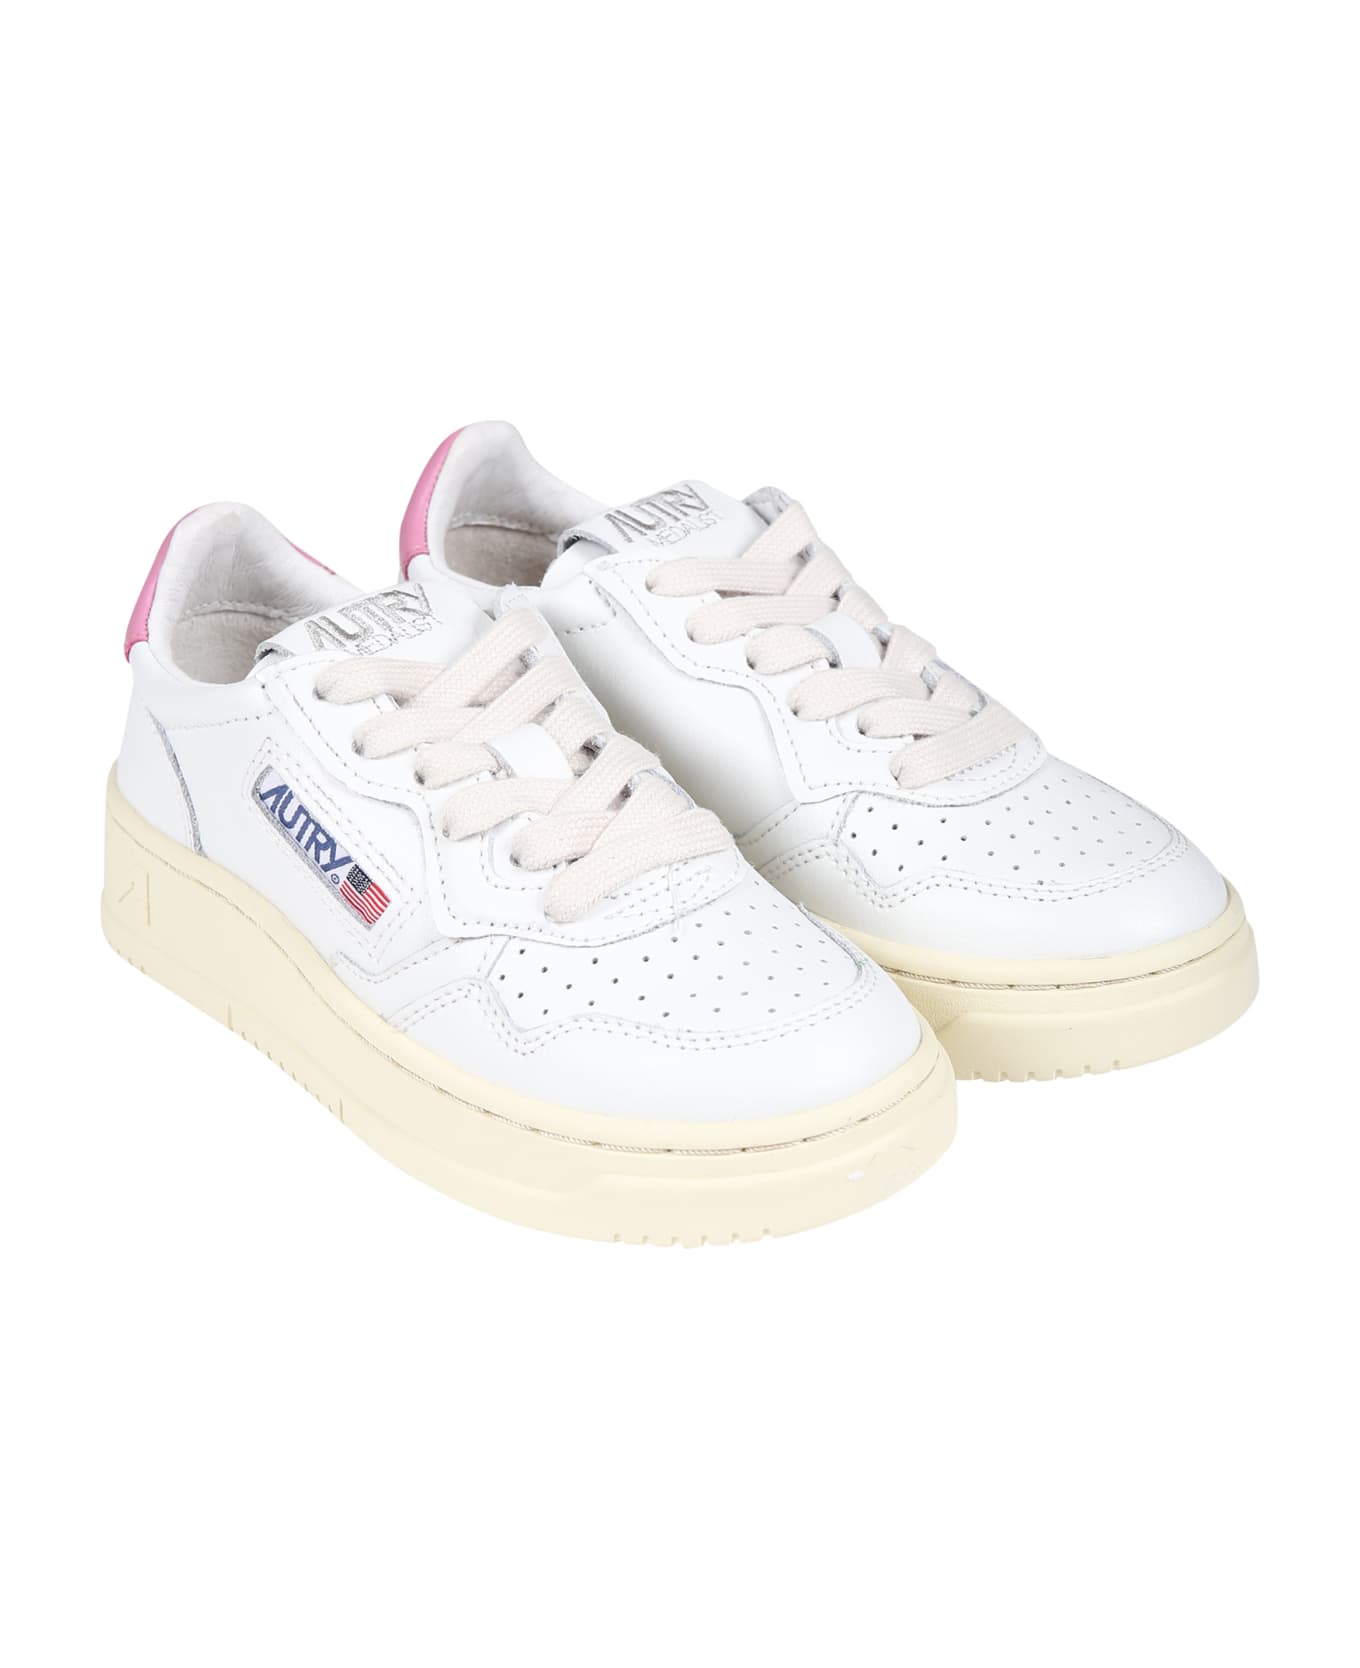 Autry White Sneakers For Girl With Logo - White シューズ